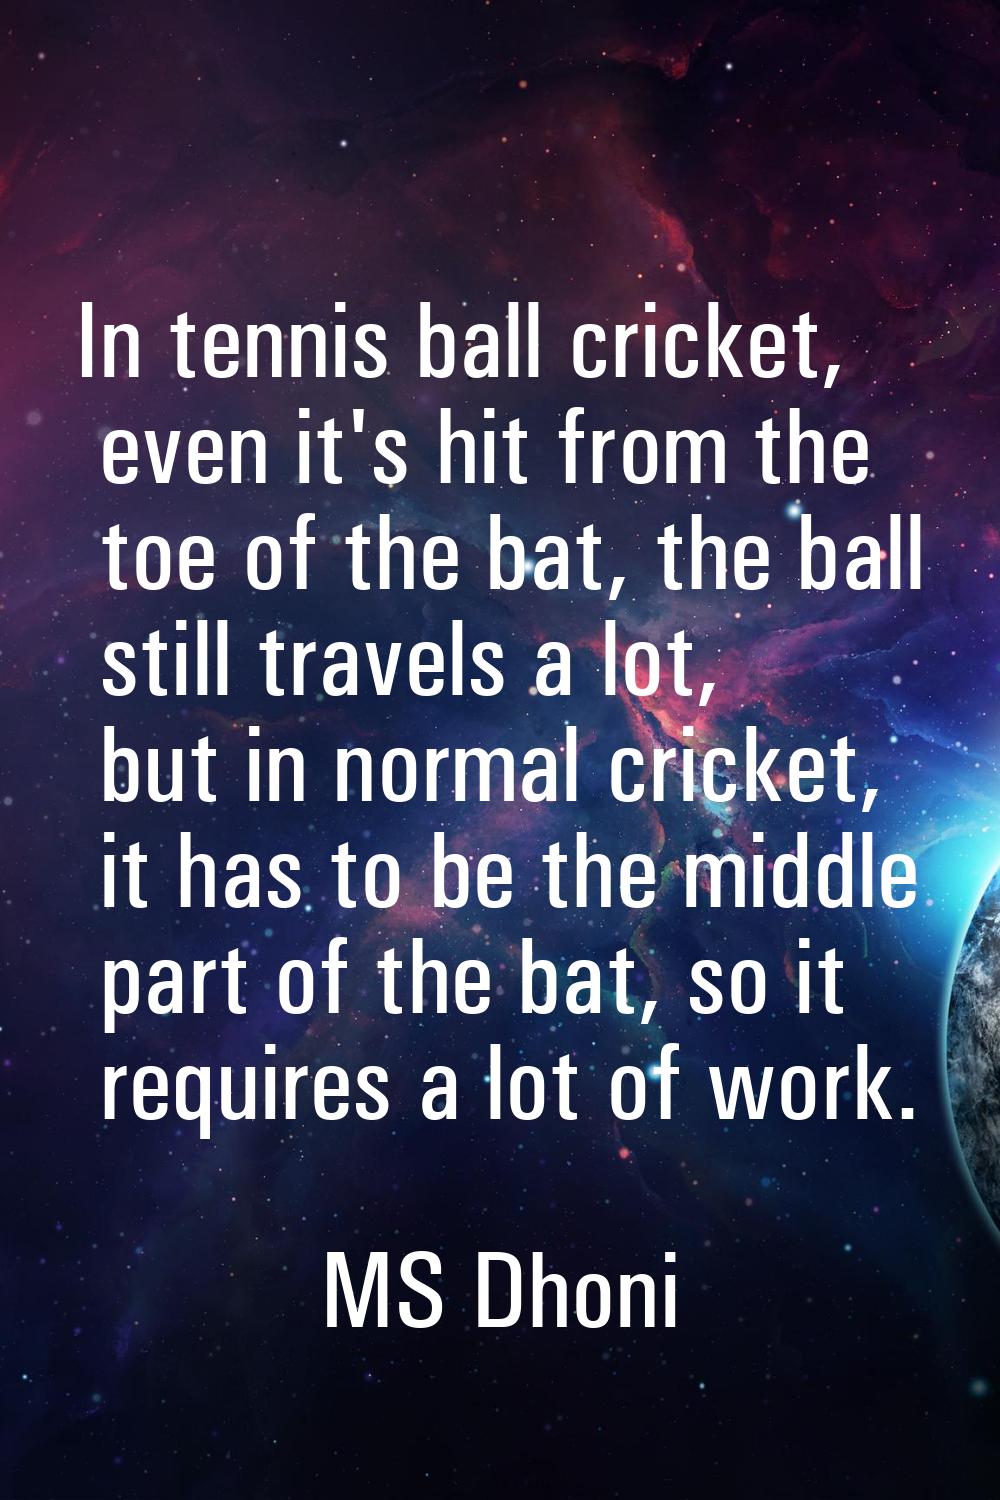 In tennis ball cricket, even it's hit from the toe of the bat, the ball still travels a lot, but in